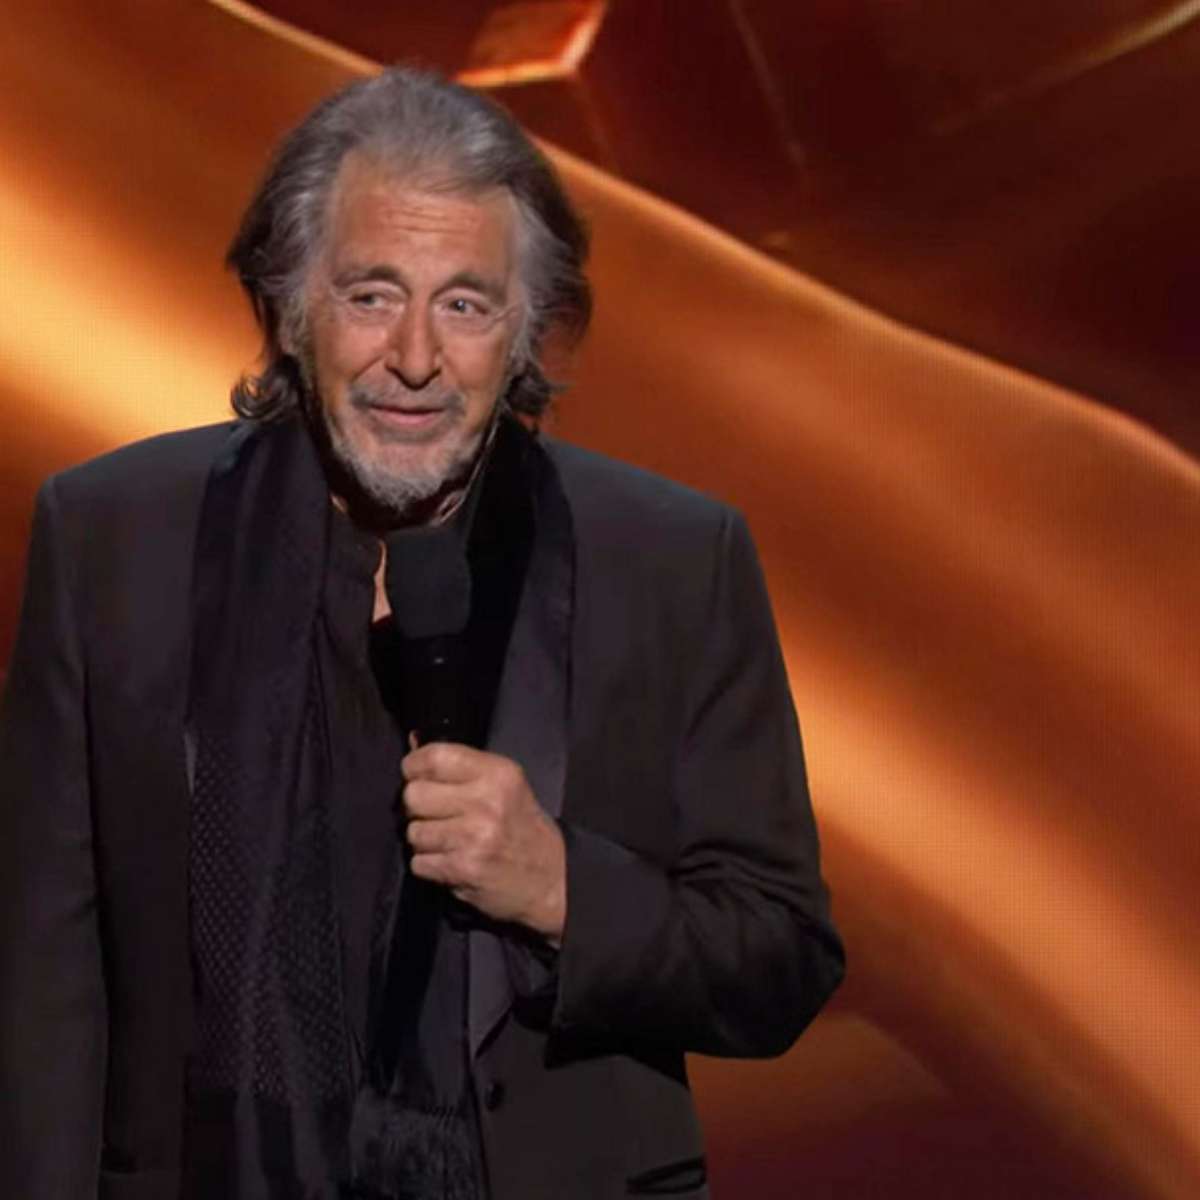 Al Pacino presented Christopher Judge with his award for best performa